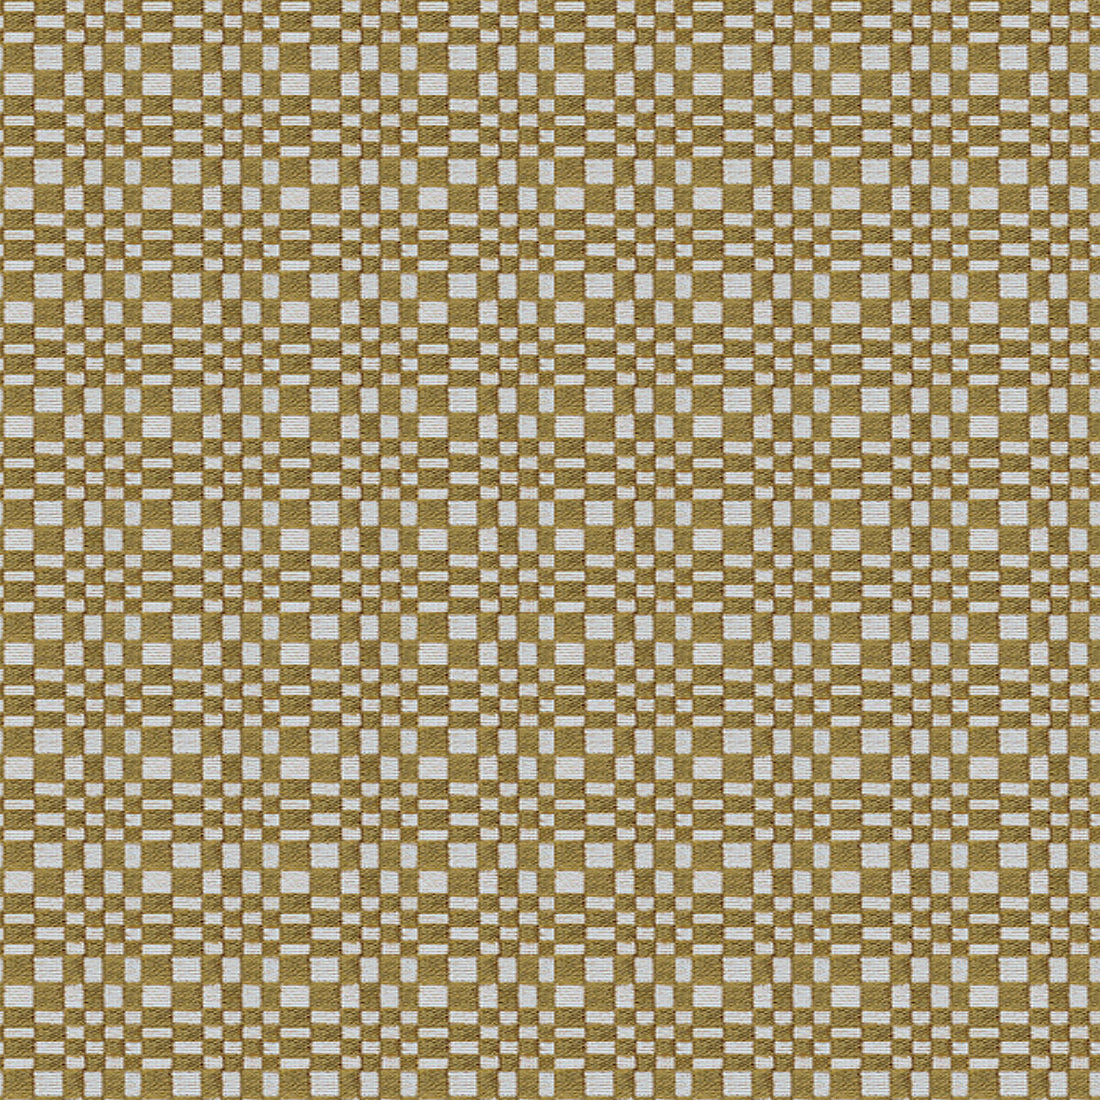 Santa Eulalia fabric in tostado color - pattern GDT5686.005.0 - by Gaston y Daniela in the Gaston Maiorica collection